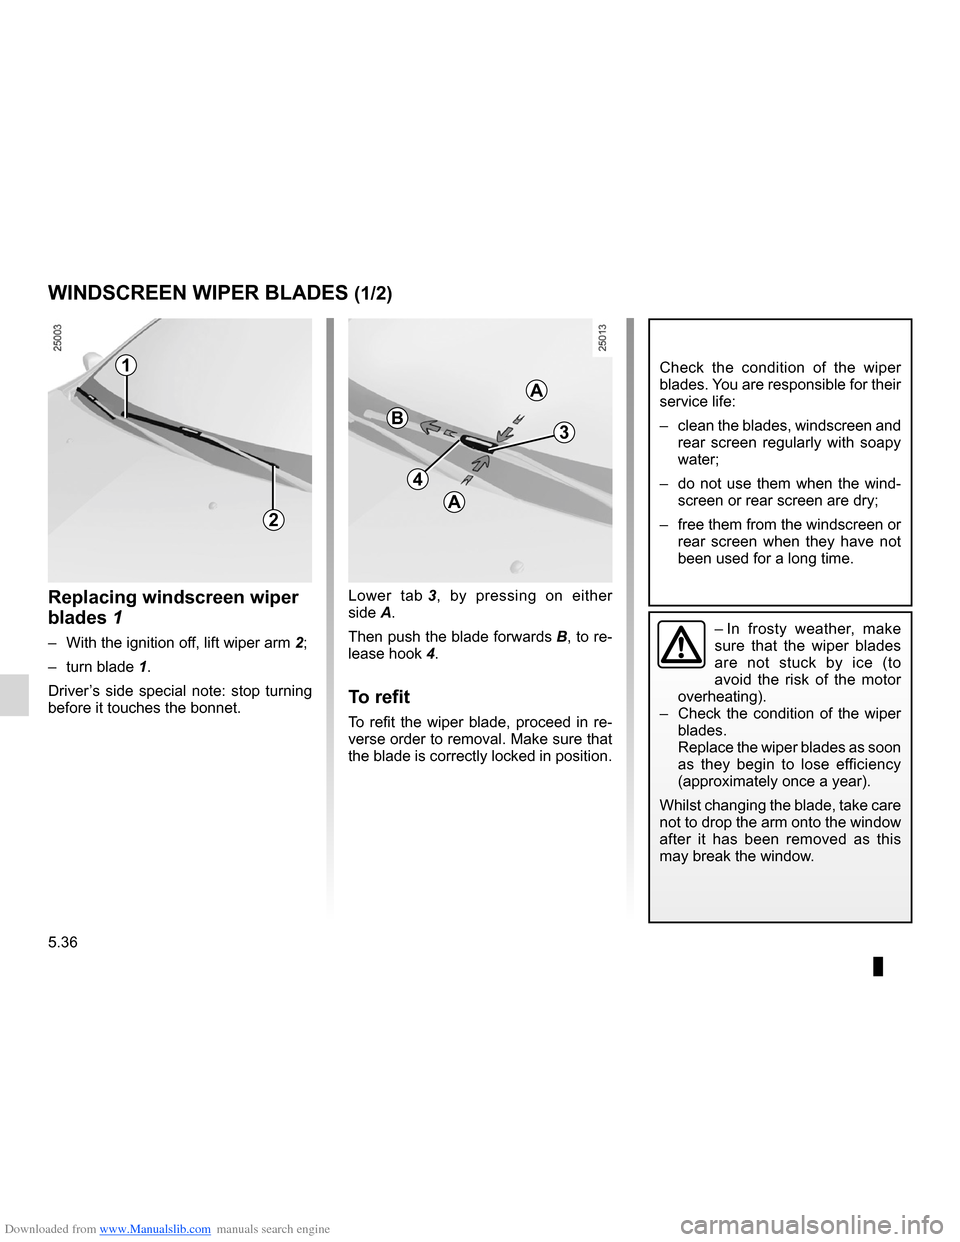 RENAULT CLIO 2012 X85 / 3.G Service Manual Downloaded from www.Manualslib.com manuals search engine wiper blades ......................................... (up to the end of the DU)
wipers blades  ............................................. (